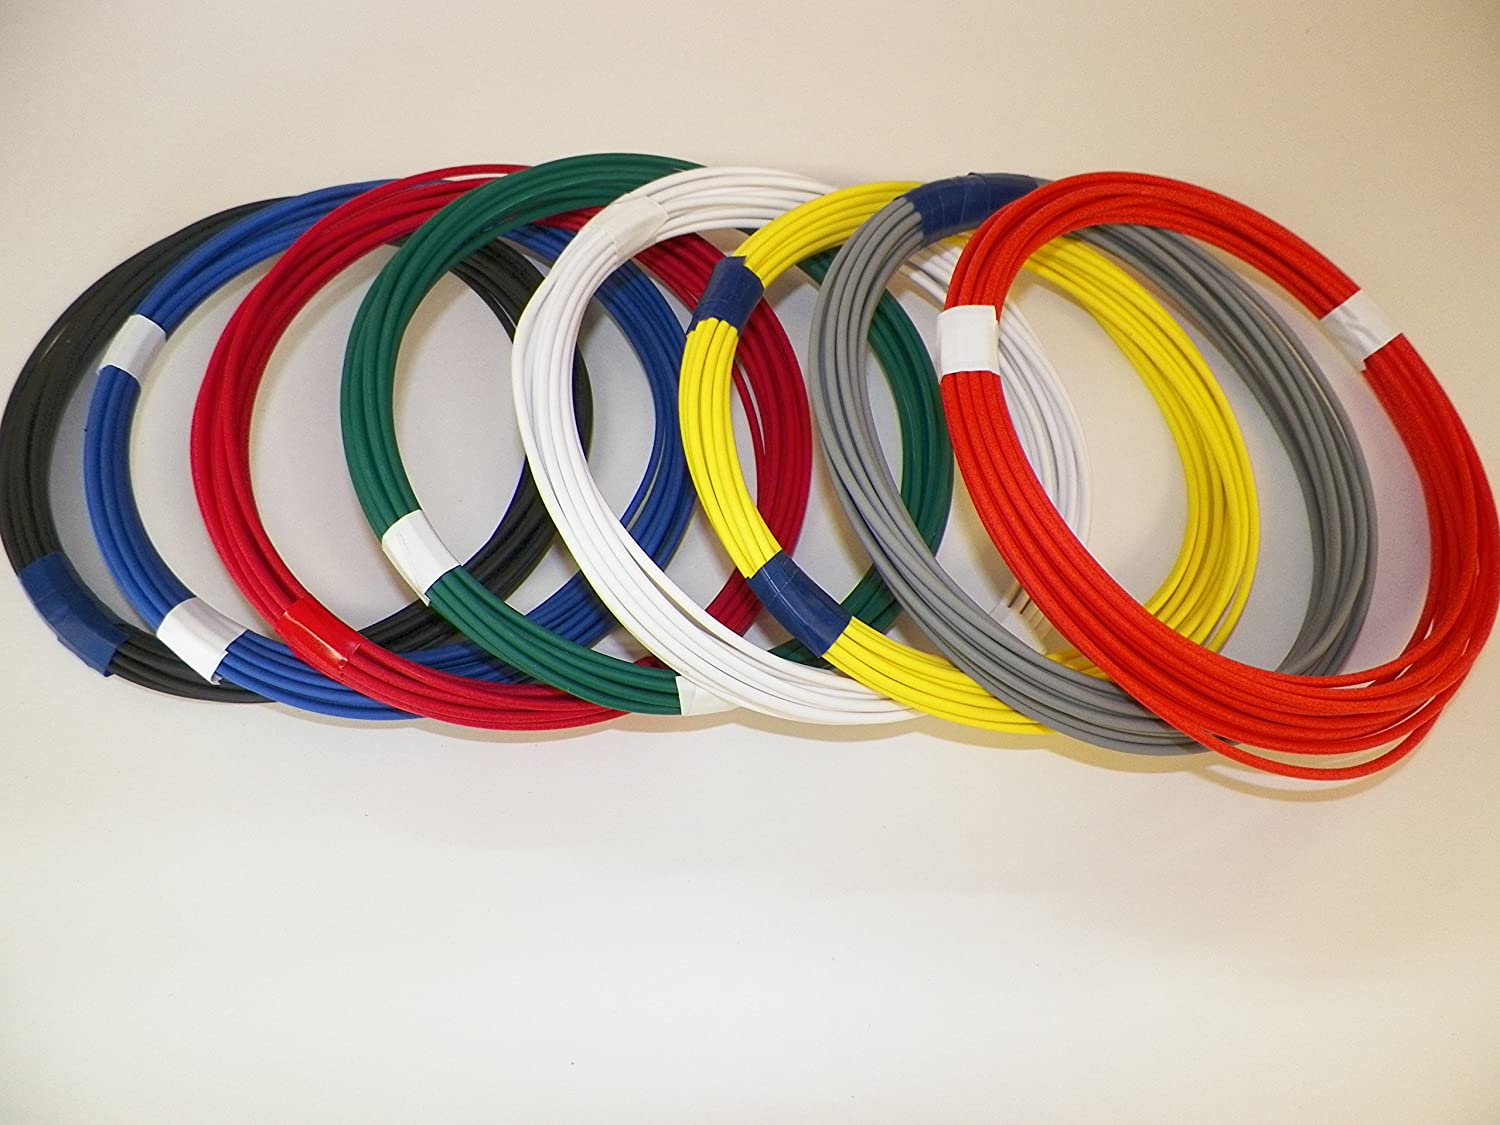 Automotive Cable Suppliers And Cable Manufacturing Services